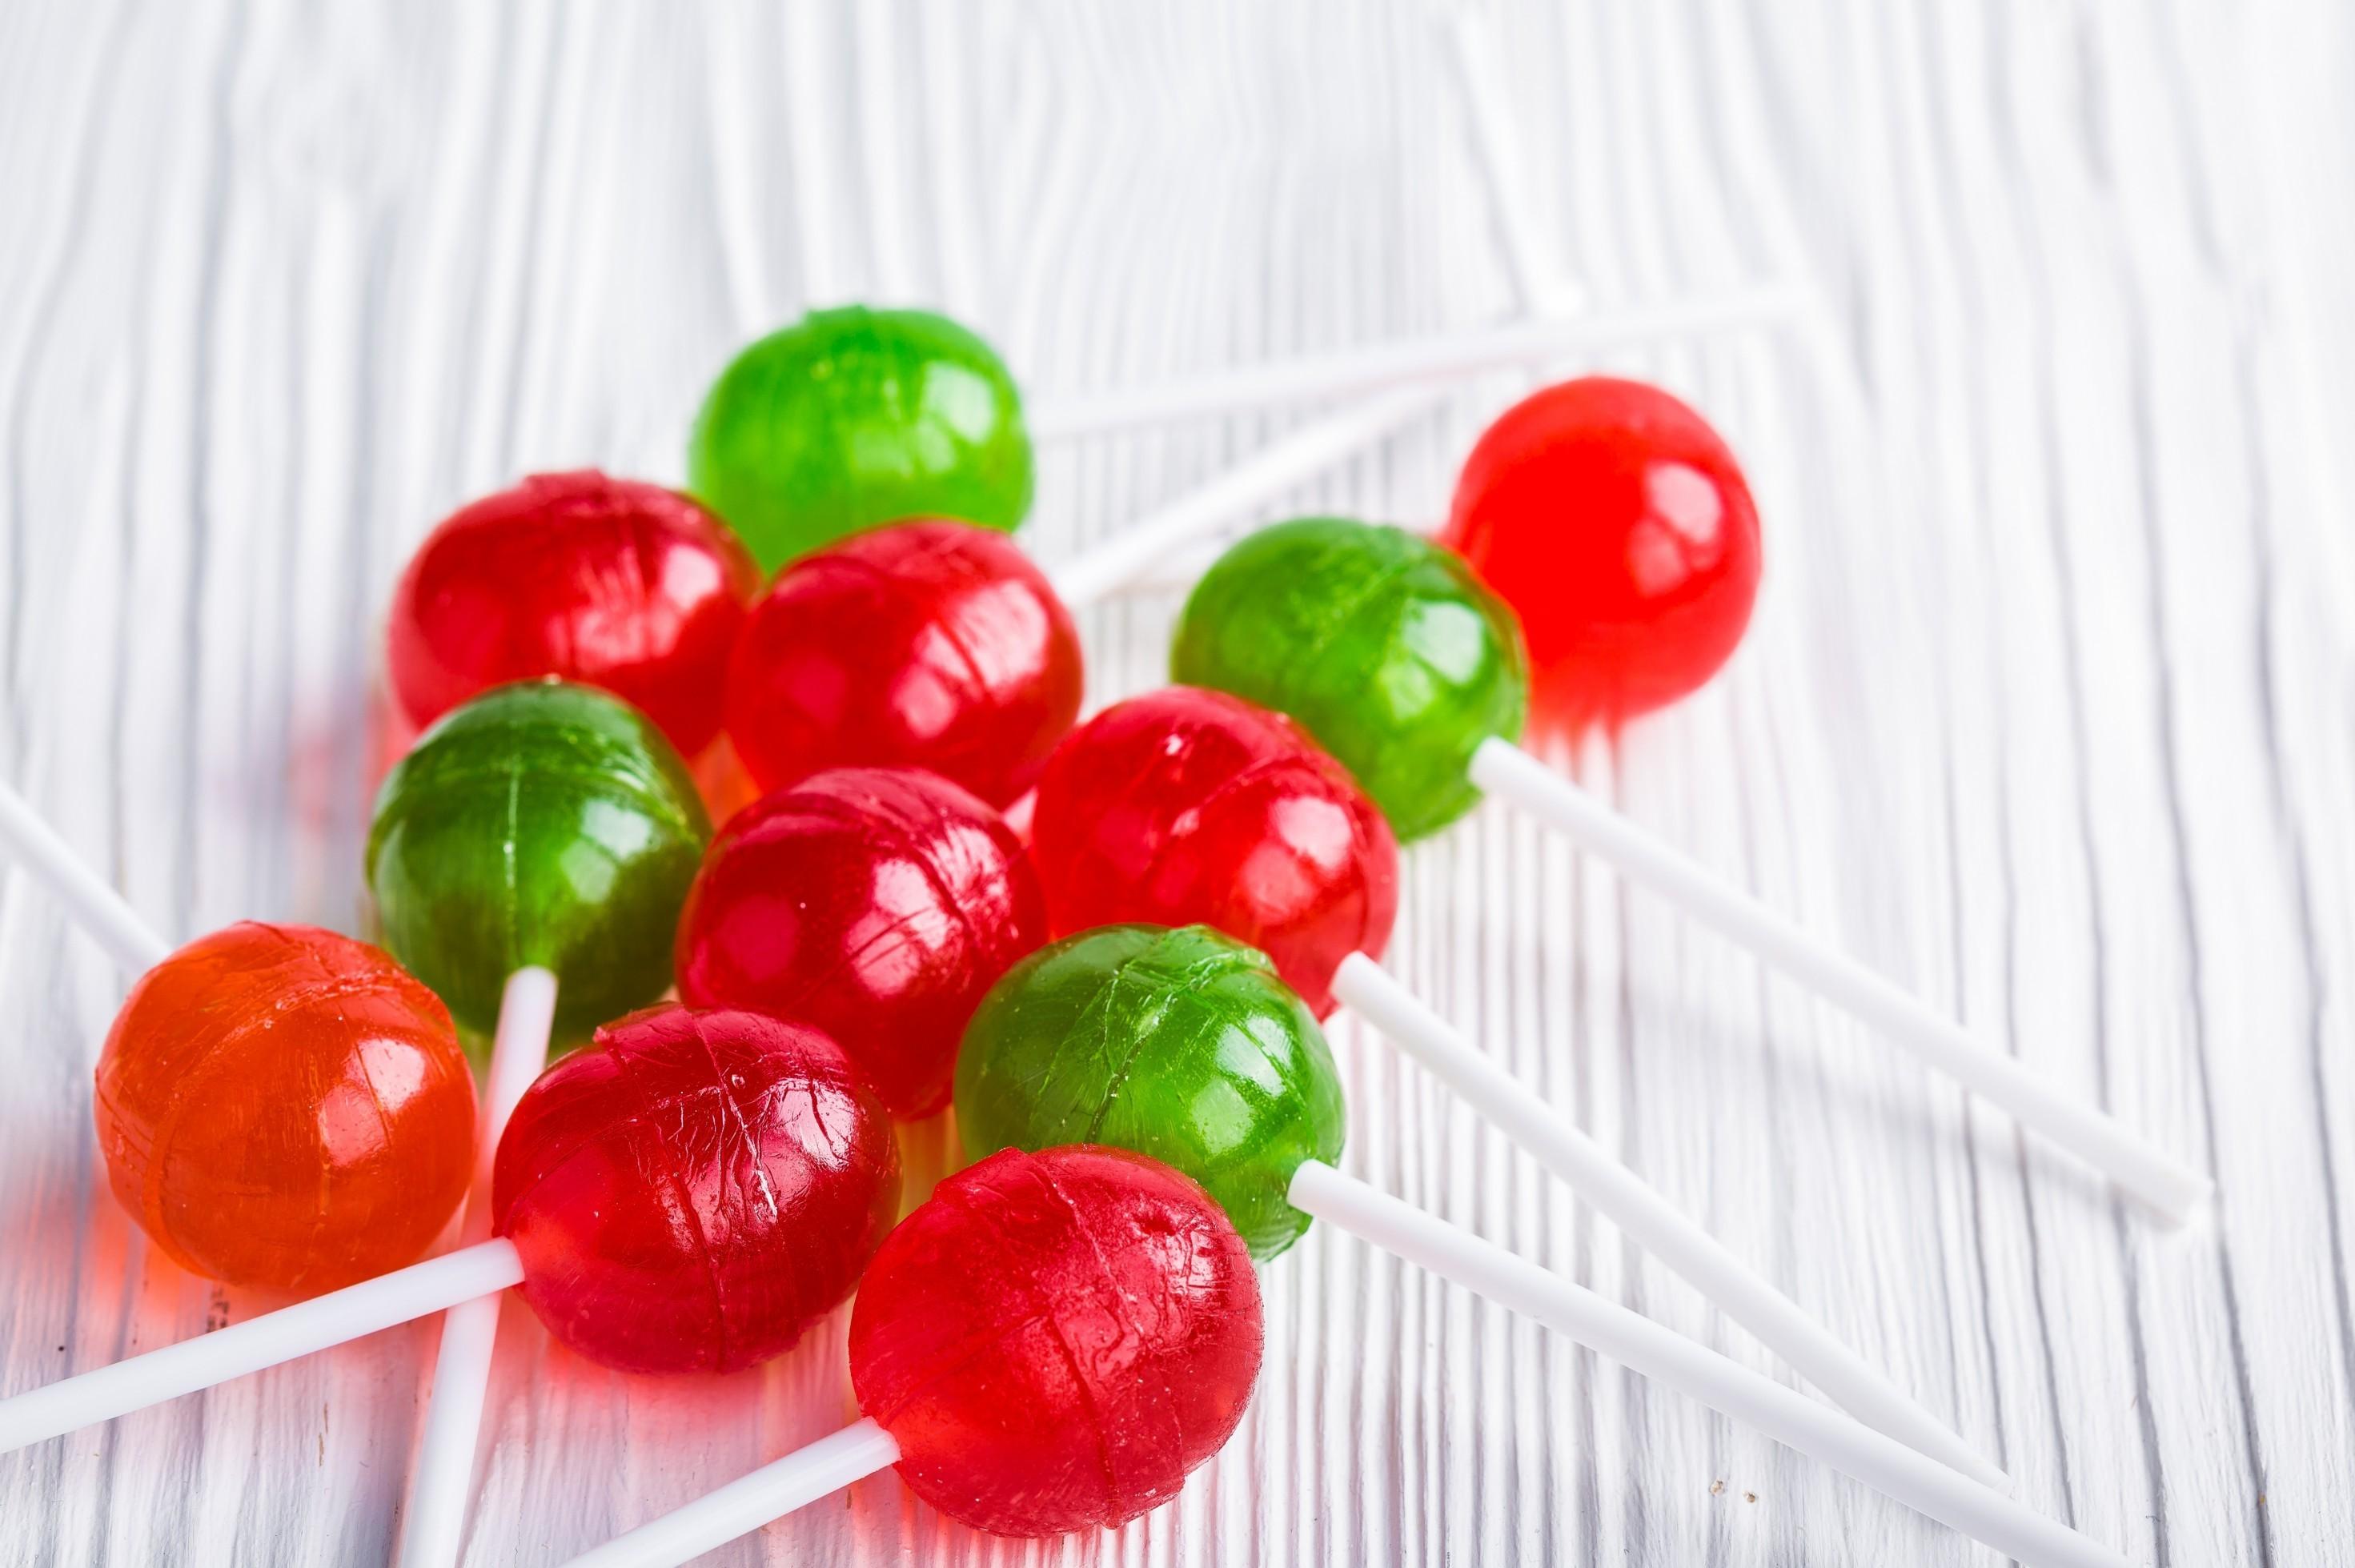 Download 2942x1959 Lollipops, Colorful, Candy, Sweets